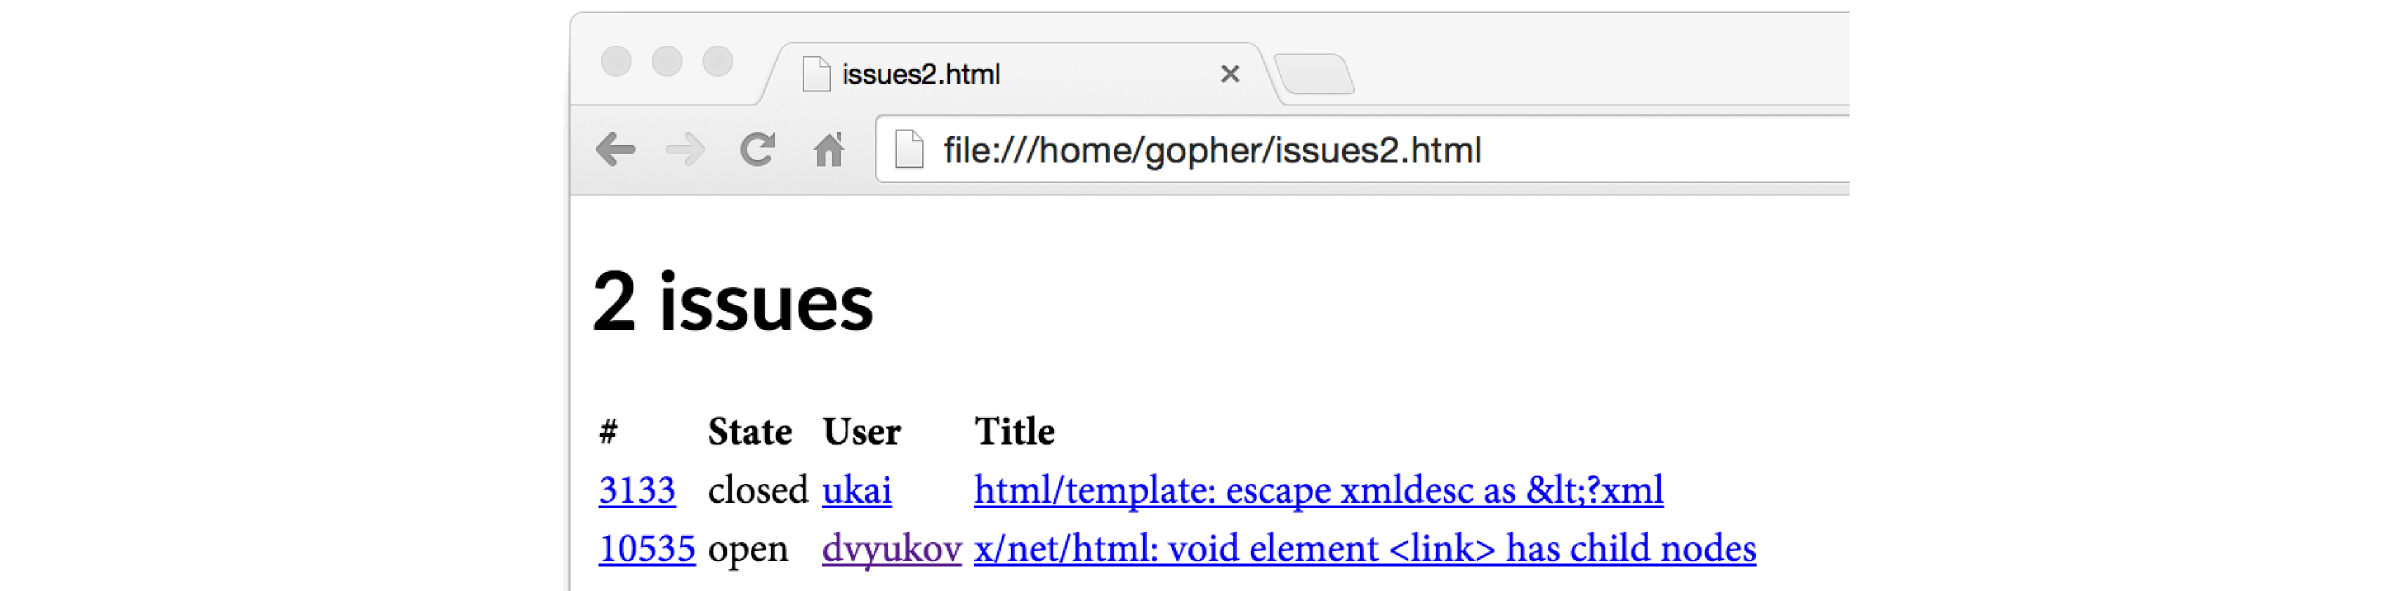 HTML metacharacters in issue titles are correctly displayed.